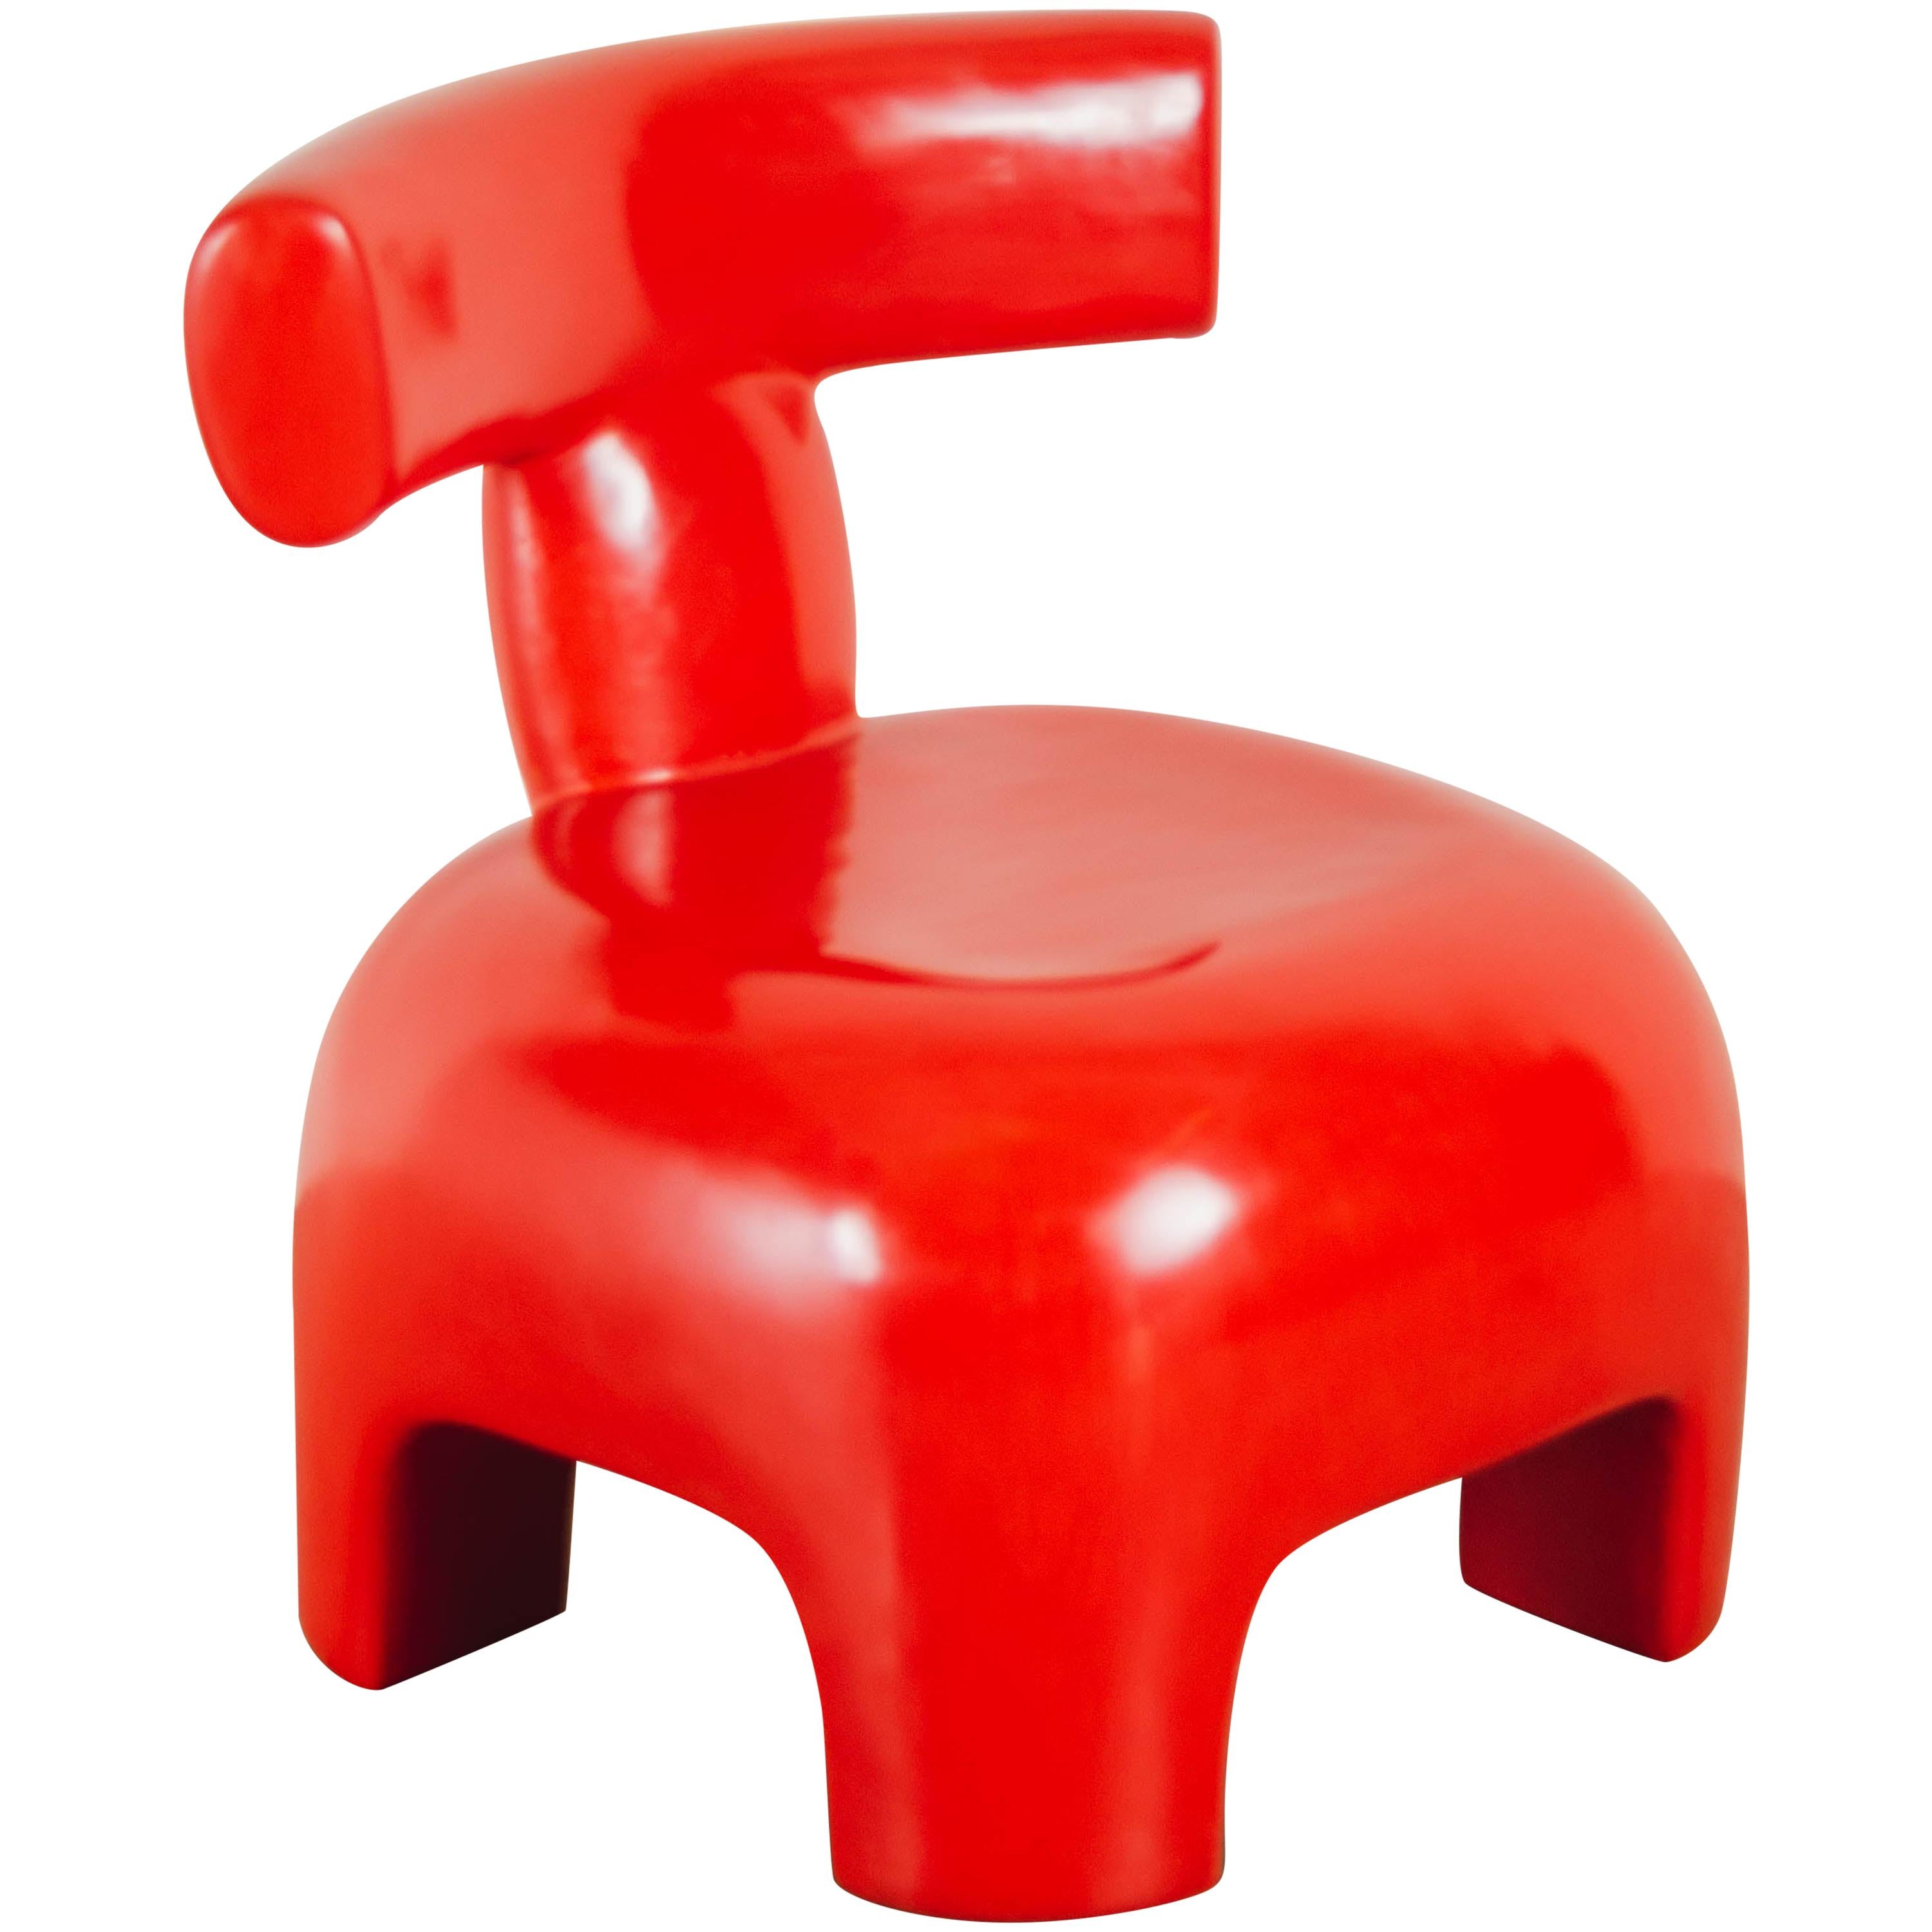 Back Rest Chair, Coral Lacquer by Robert Kuo, Handmade, Limited Edition